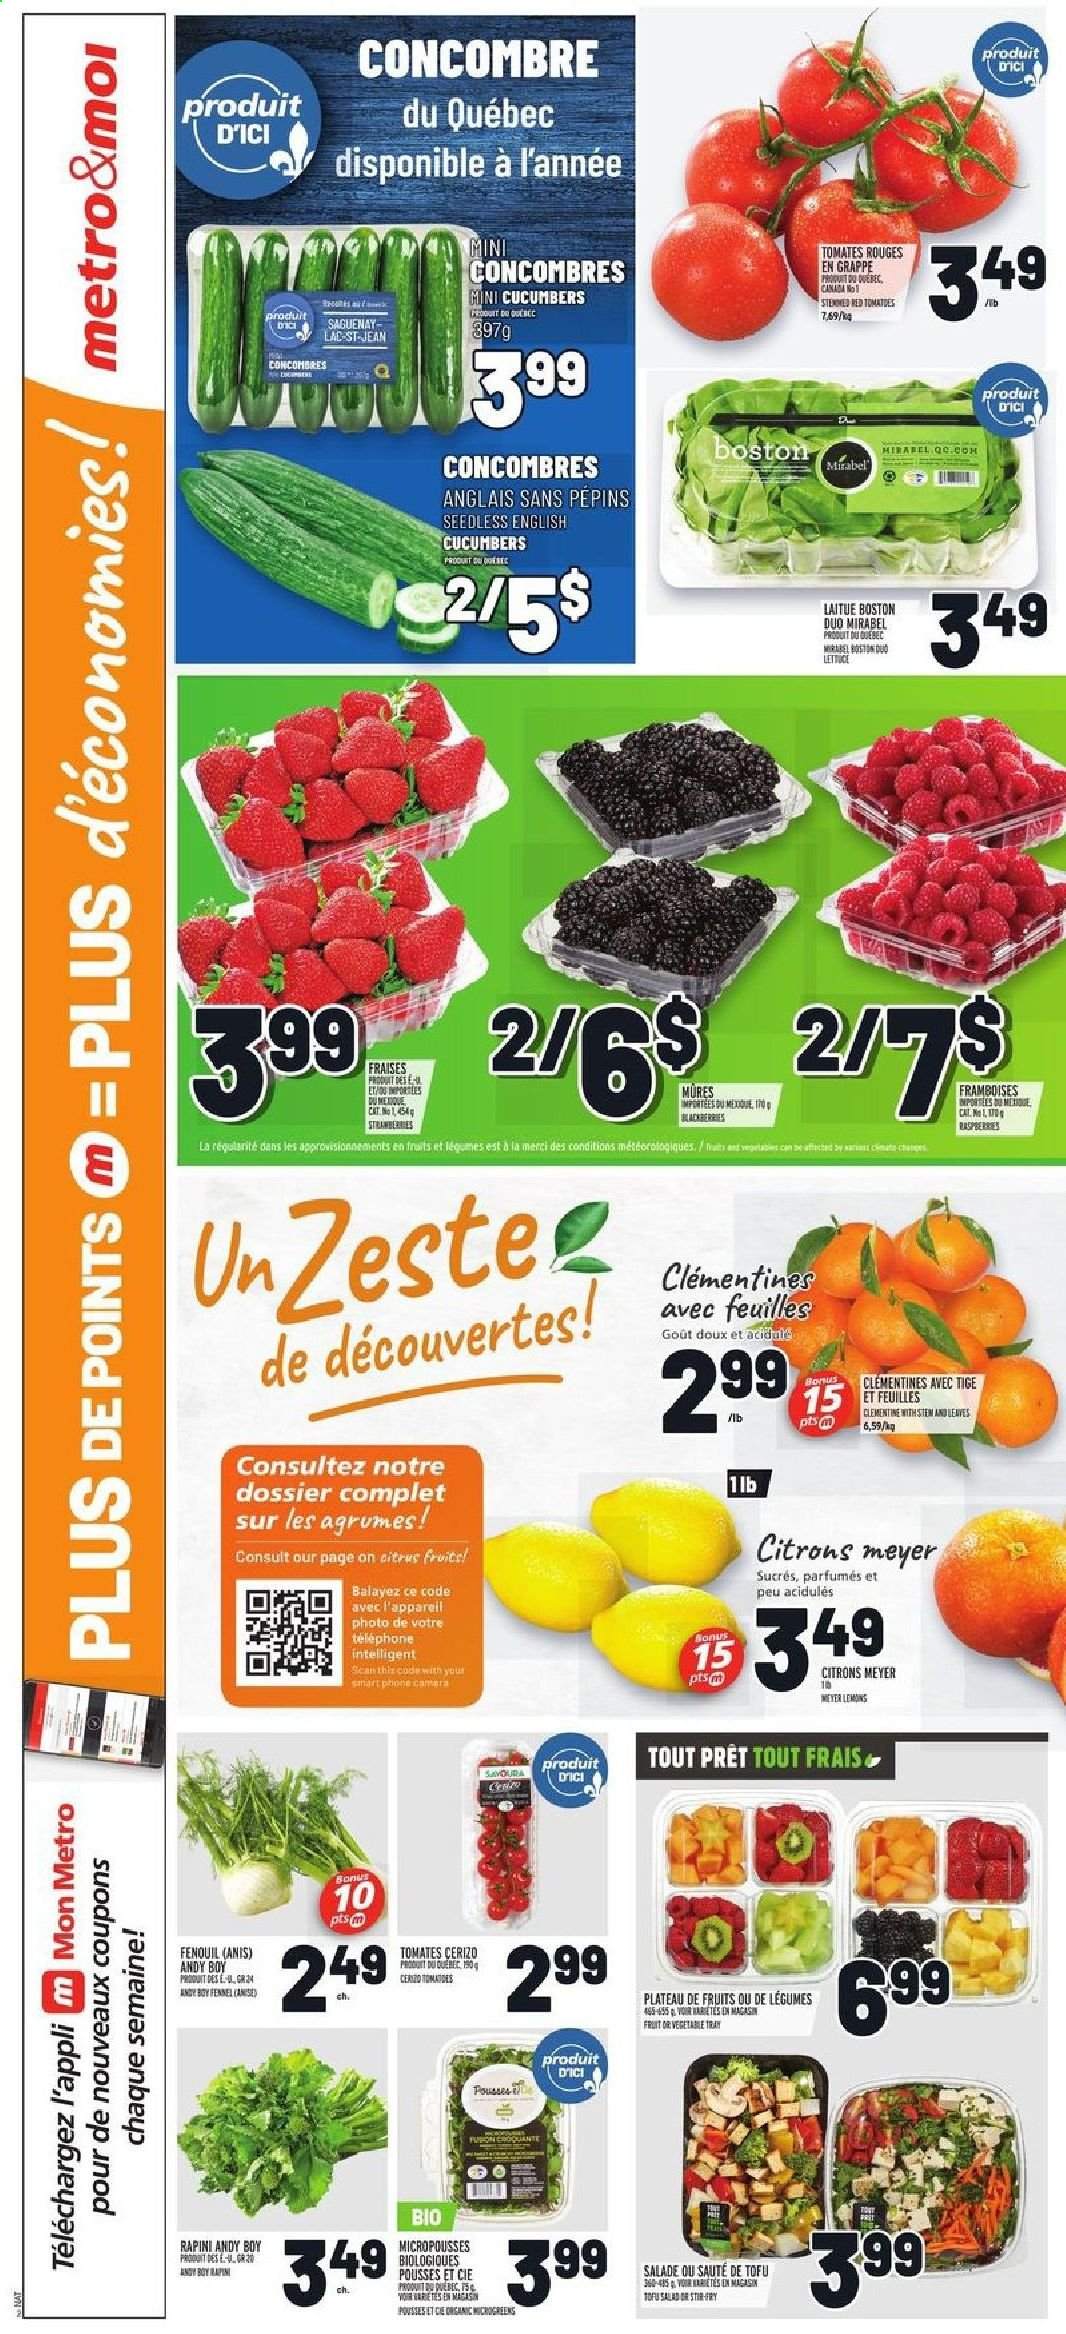 thumbnail - Metro Flyer - January 14, 2021 - January 20, 2021 - Sales products - cucumber, clementines, lemons, tofu, Merci, fennel, tray. Page 2.